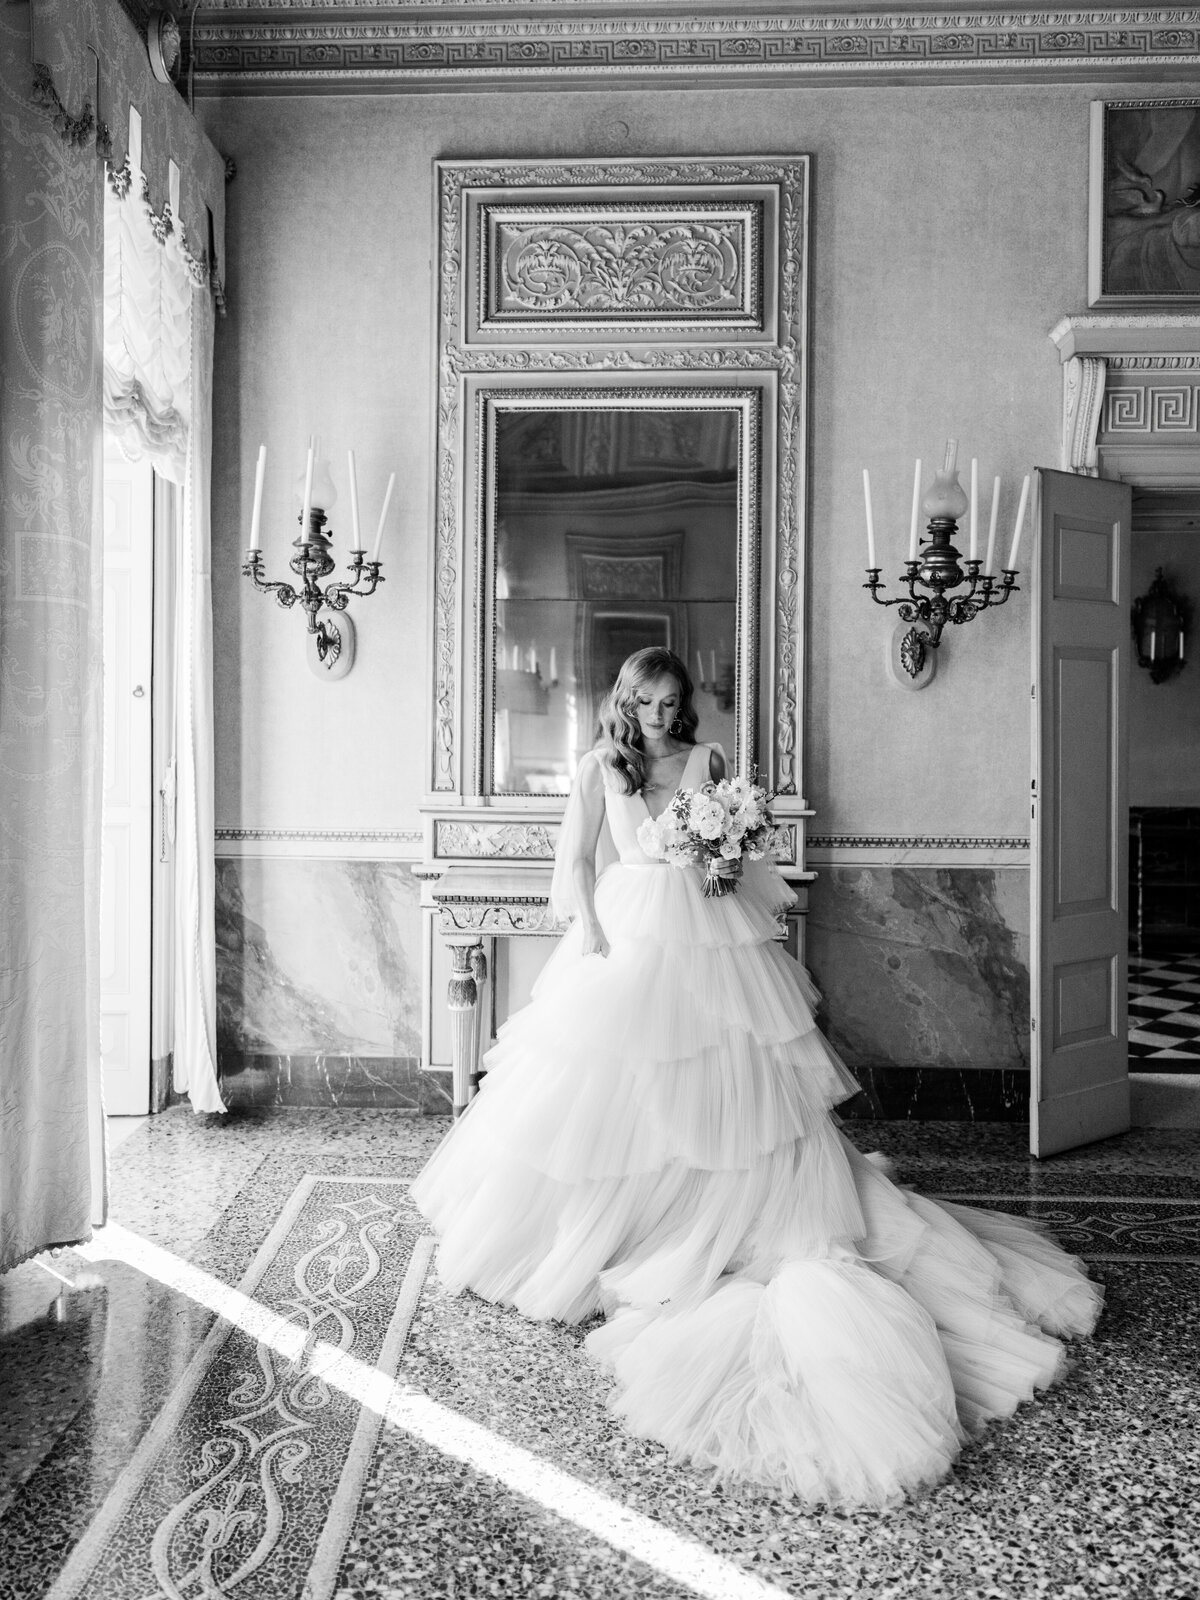 Liz Andolina Photography Destination Wedding Photographer in Italy, New York, Across the East Coast Editorial, heritage-quality images for stylish couples Villa Pizzo Editorial-Liz Andolina Photography-216